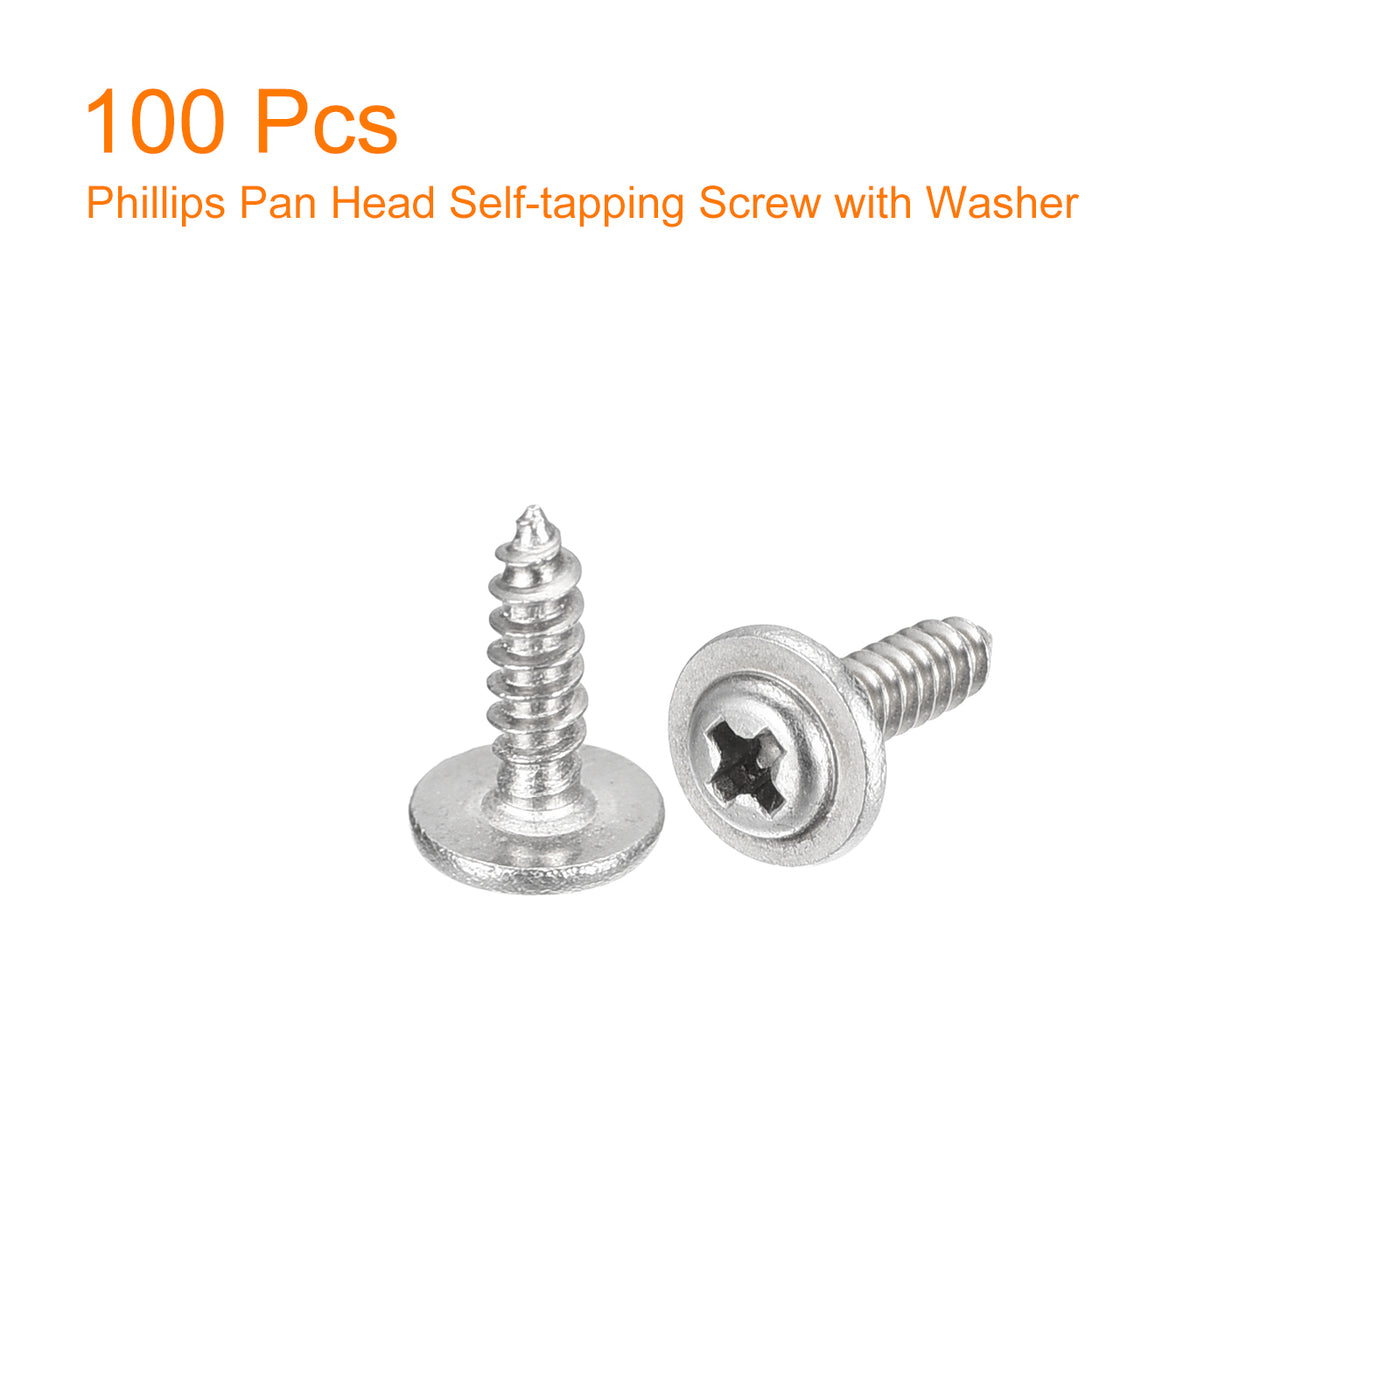 uxcell Uxcell ST2.3x8mm Phillips Pan Head Self-tapping Screw with Washer, 100pcs - 304 Stainless Steel Wood Screw Full Thread (Silver)